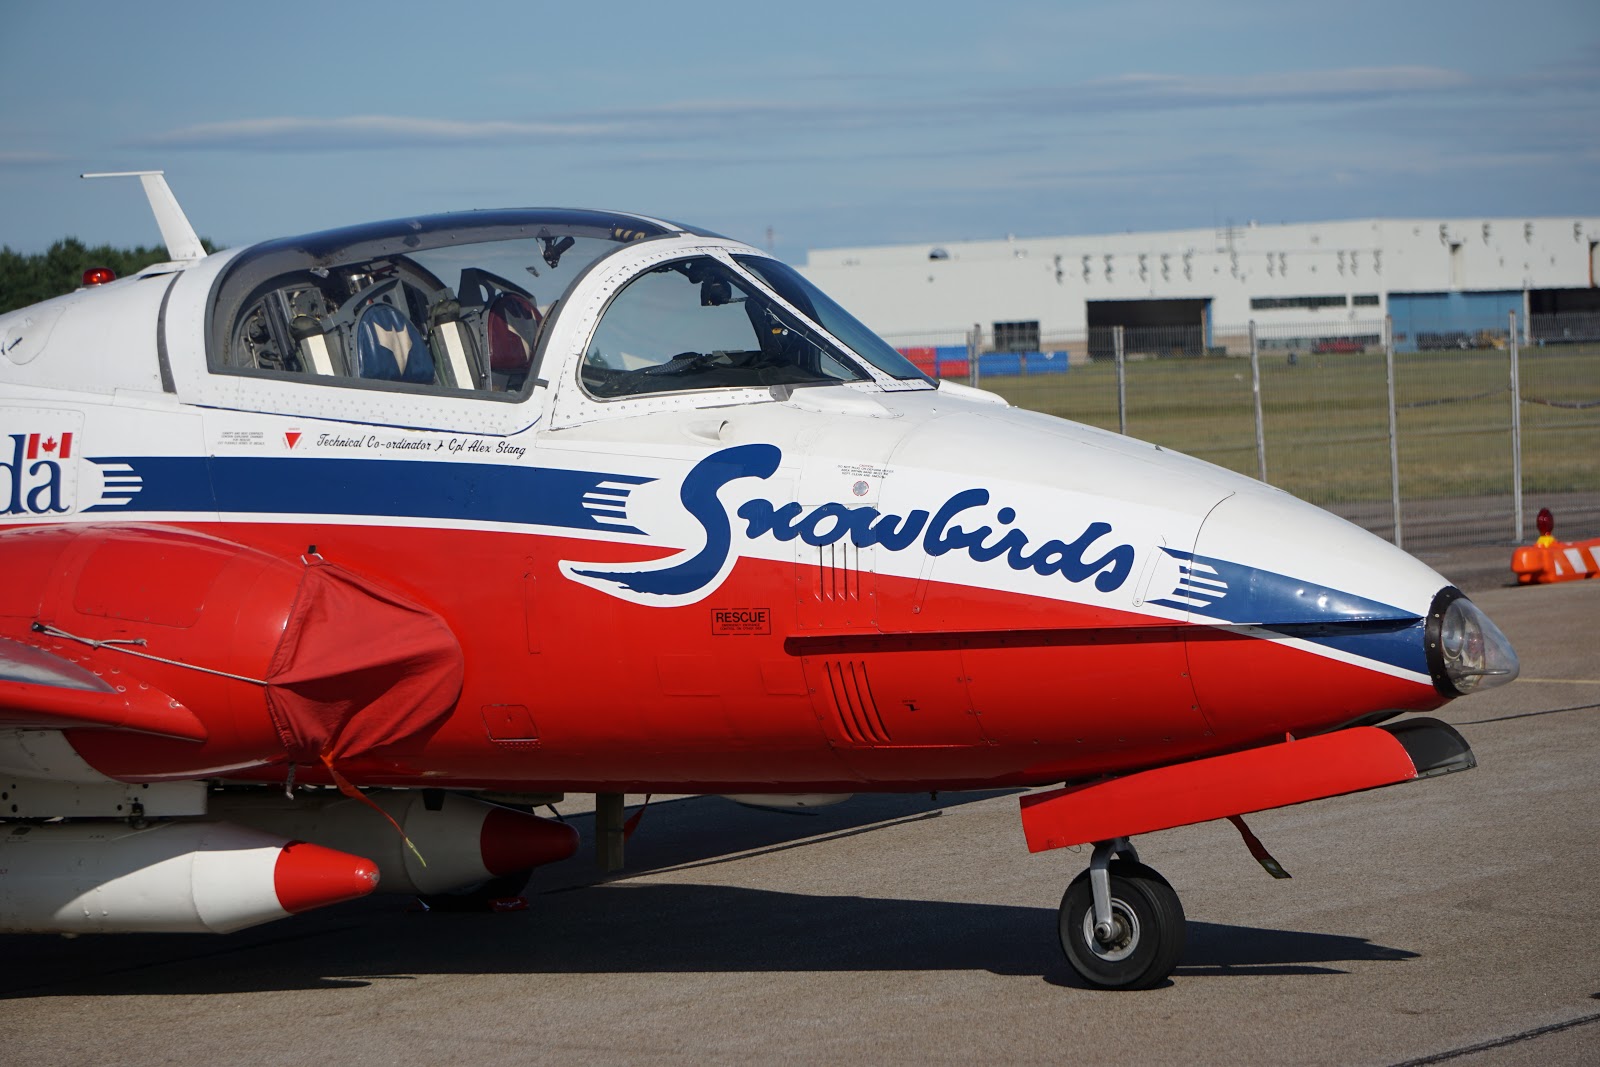 What Now For The Snowbirds